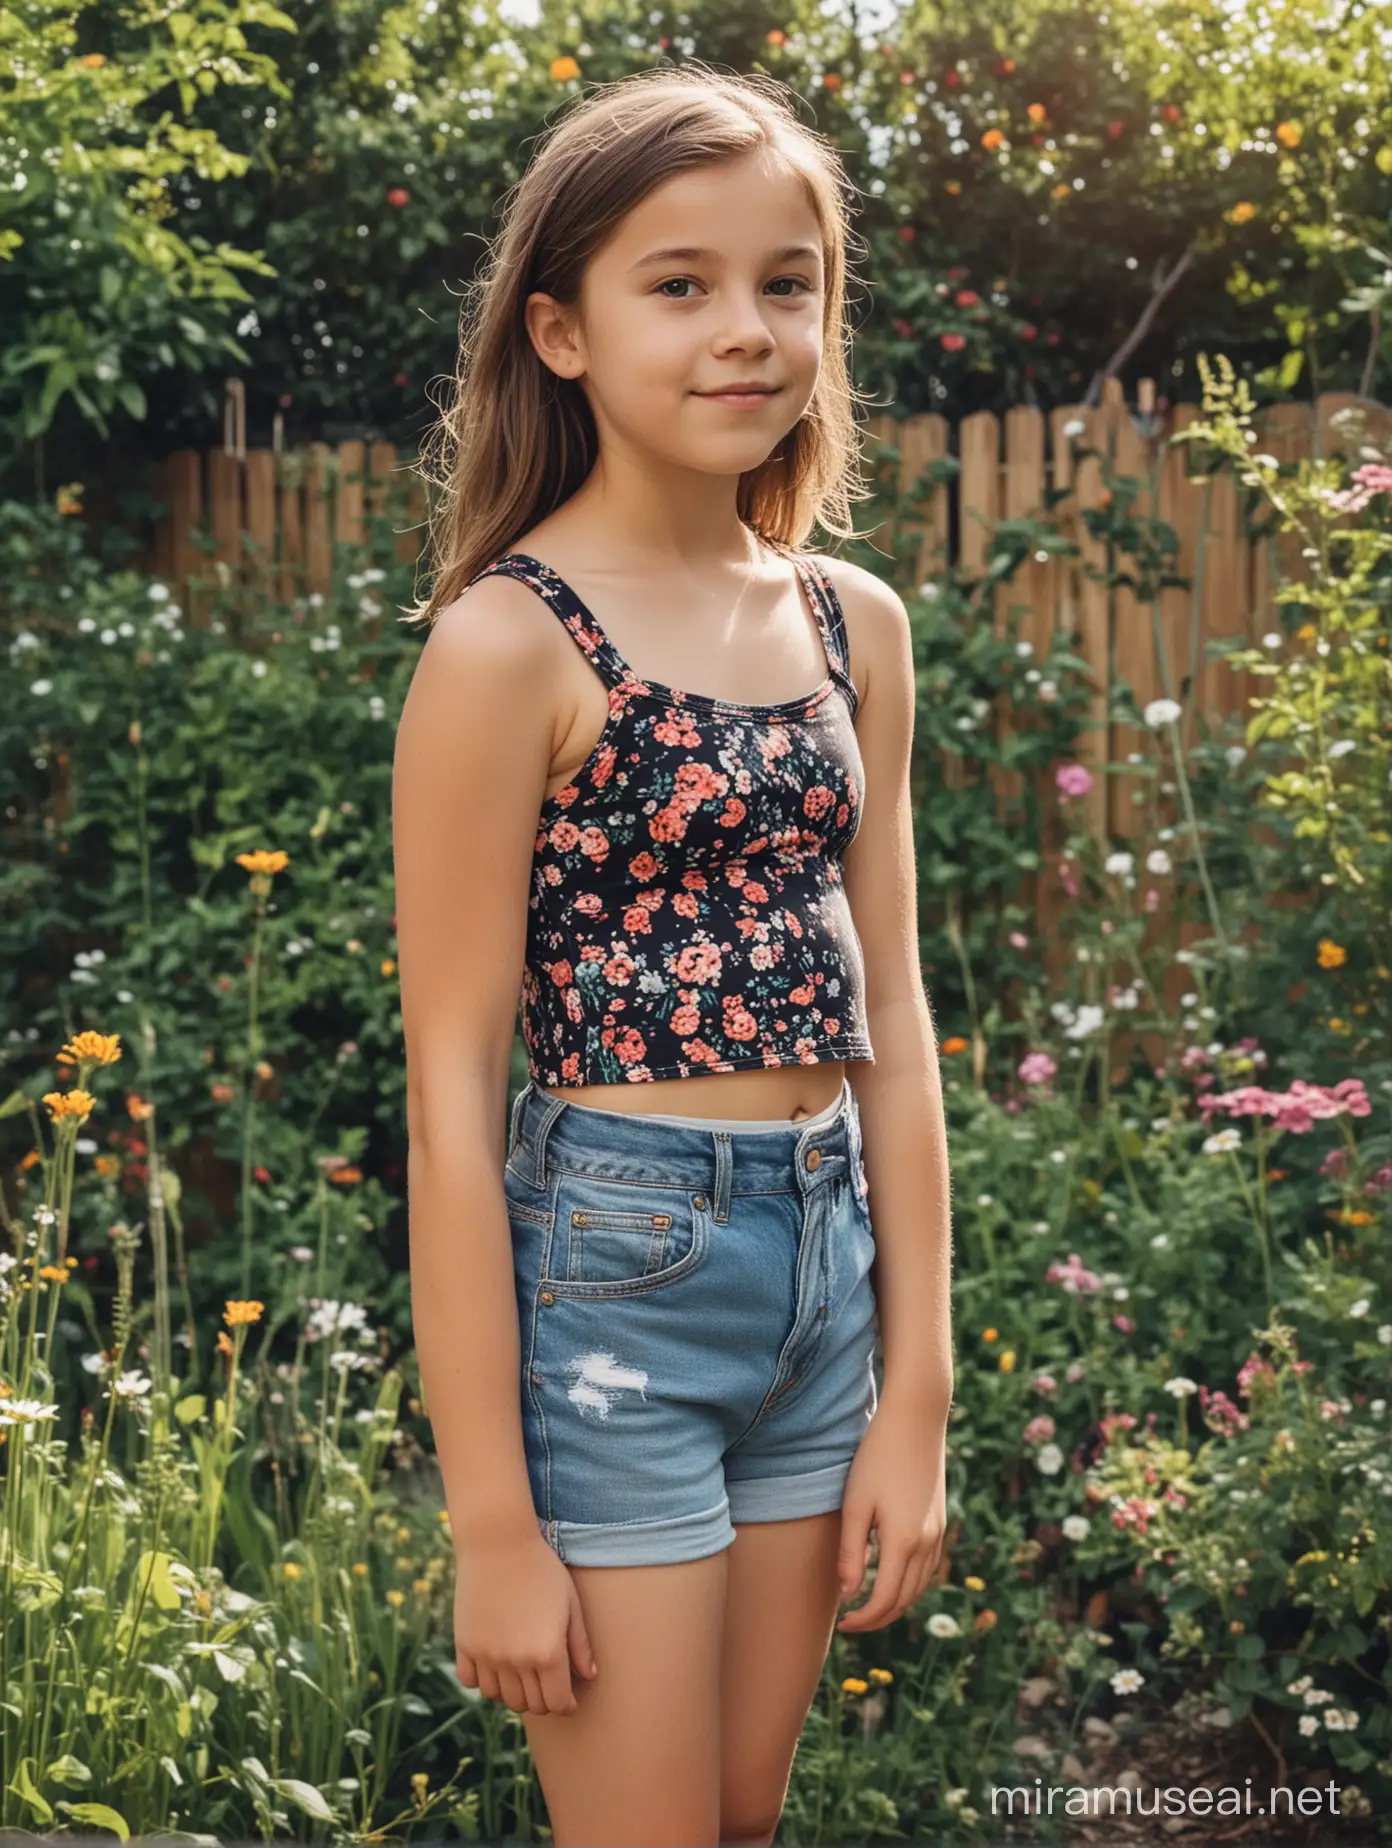 A 11 years old girl, wearing Cutout Tank Top + High-Waisted Shorts, in garden